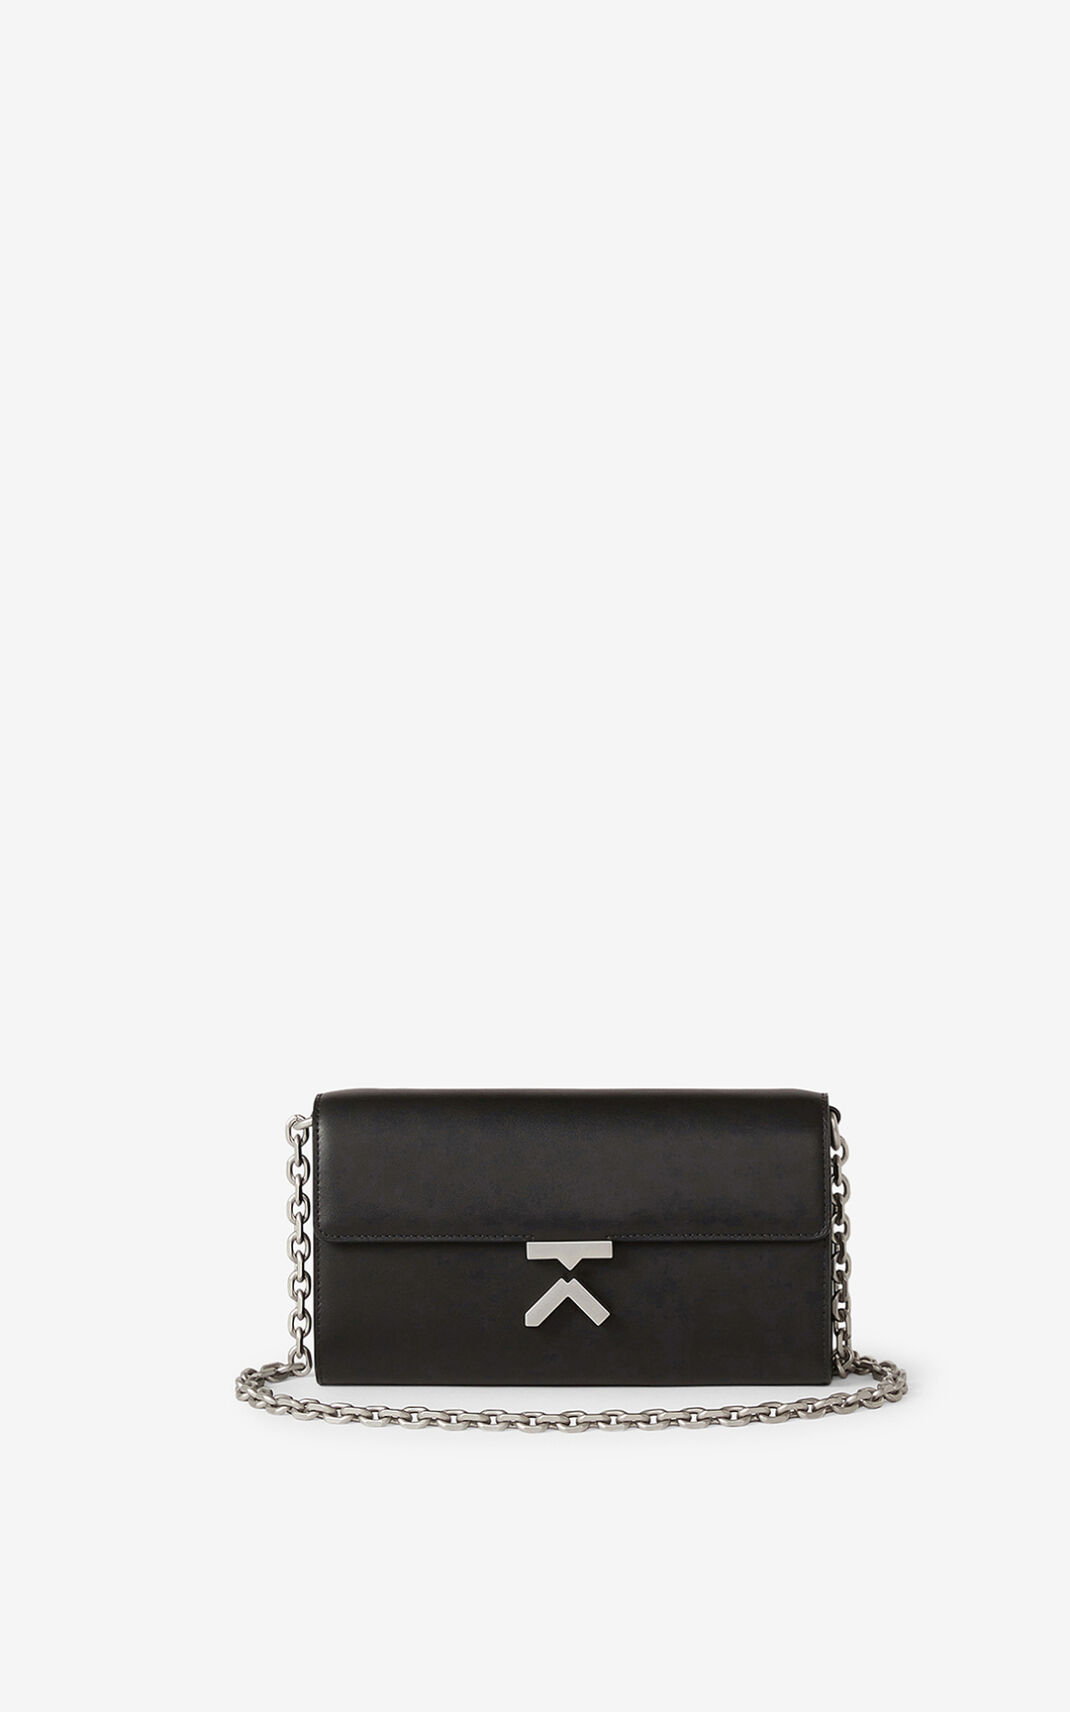 Kenzo K leather chain Wallet Black For Womens 4817QWXMG